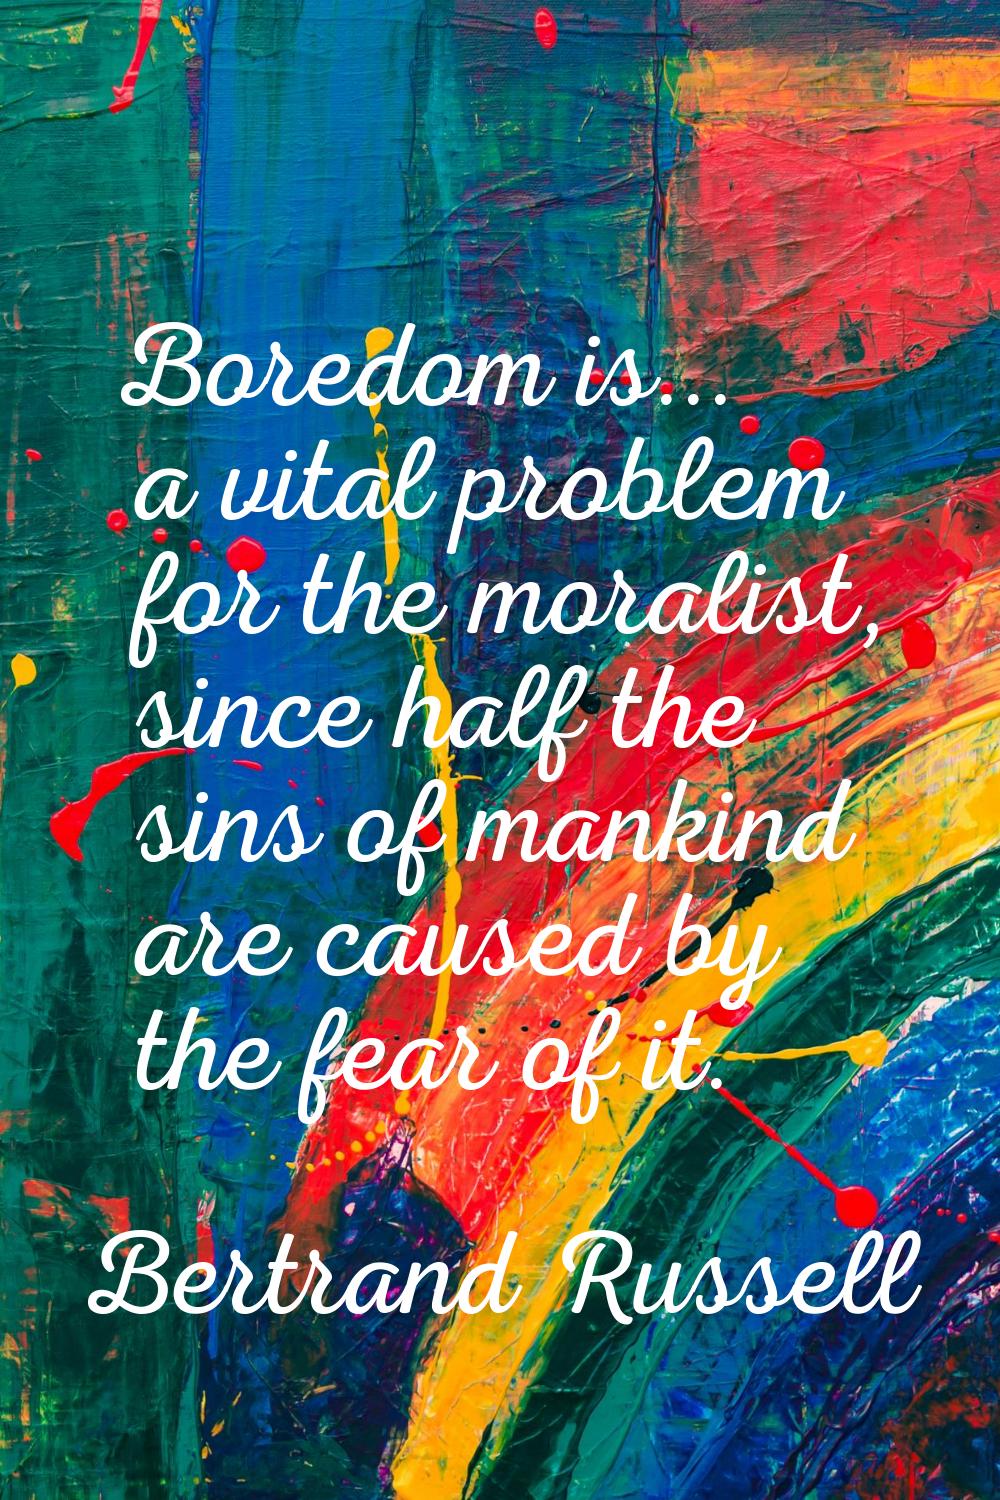 Boredom is... a vital problem for the moralist, since half the sins of mankind are caused by the fe